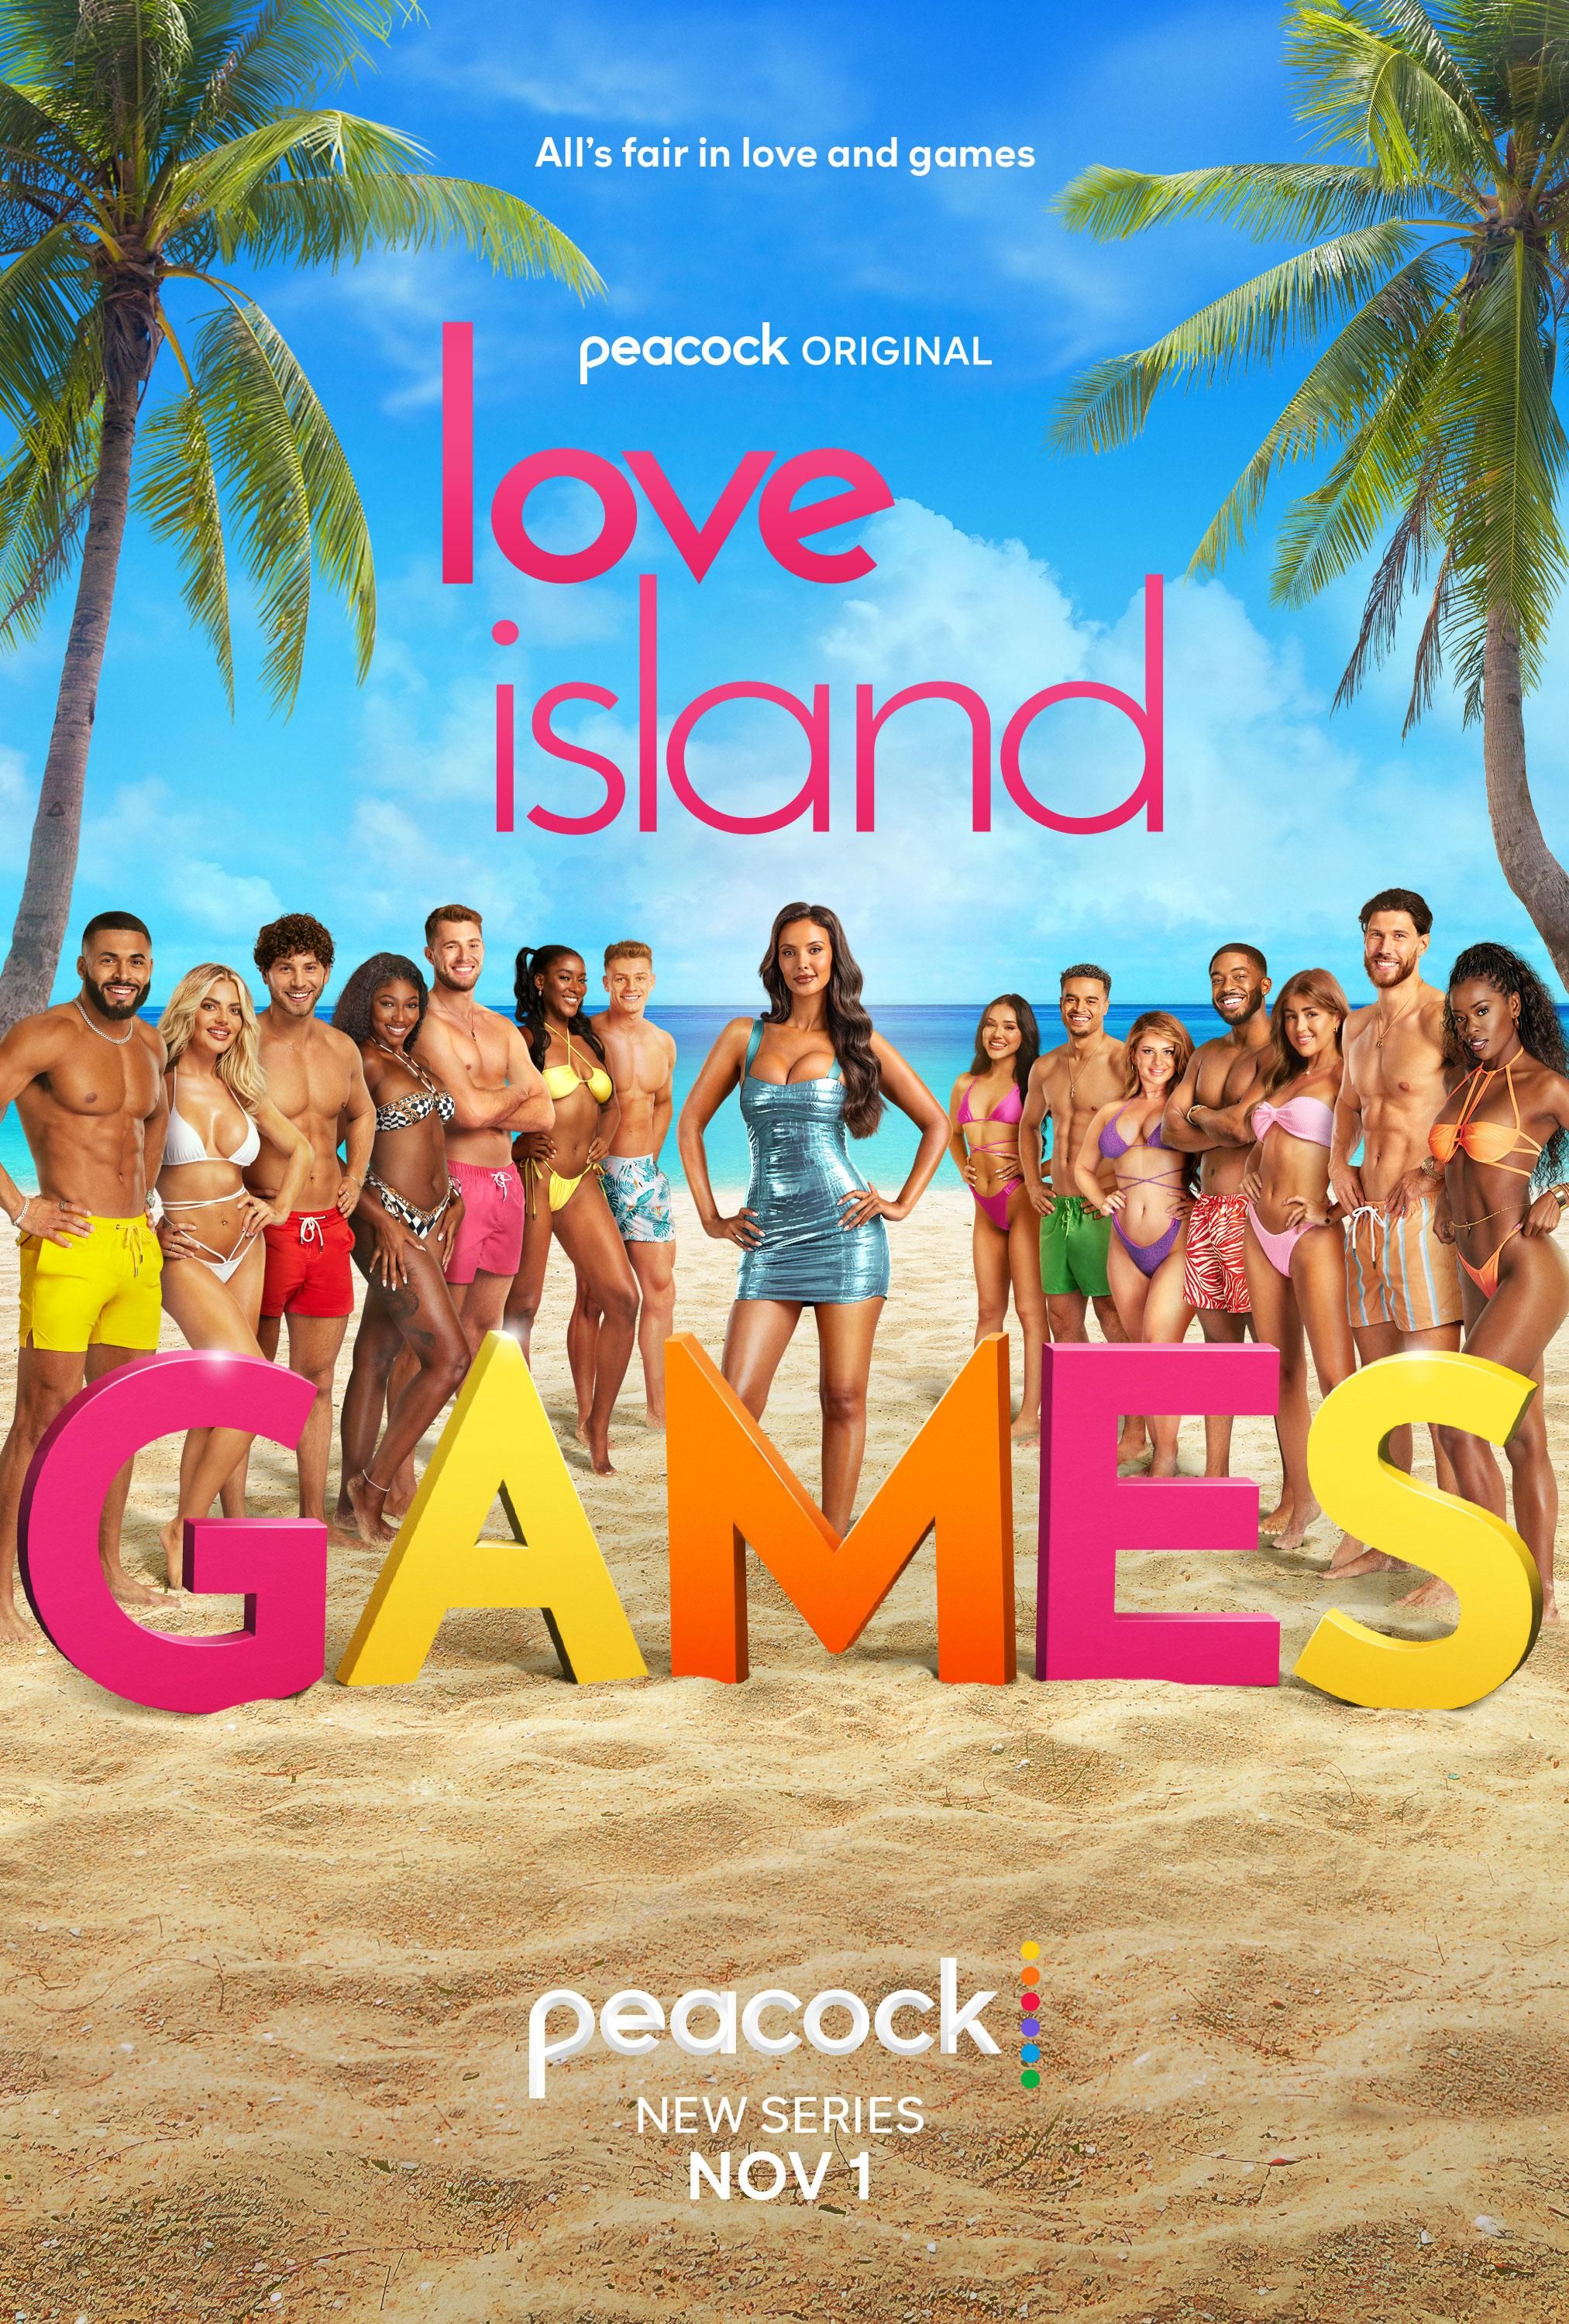 Poster for the TV show “Love Island Games”